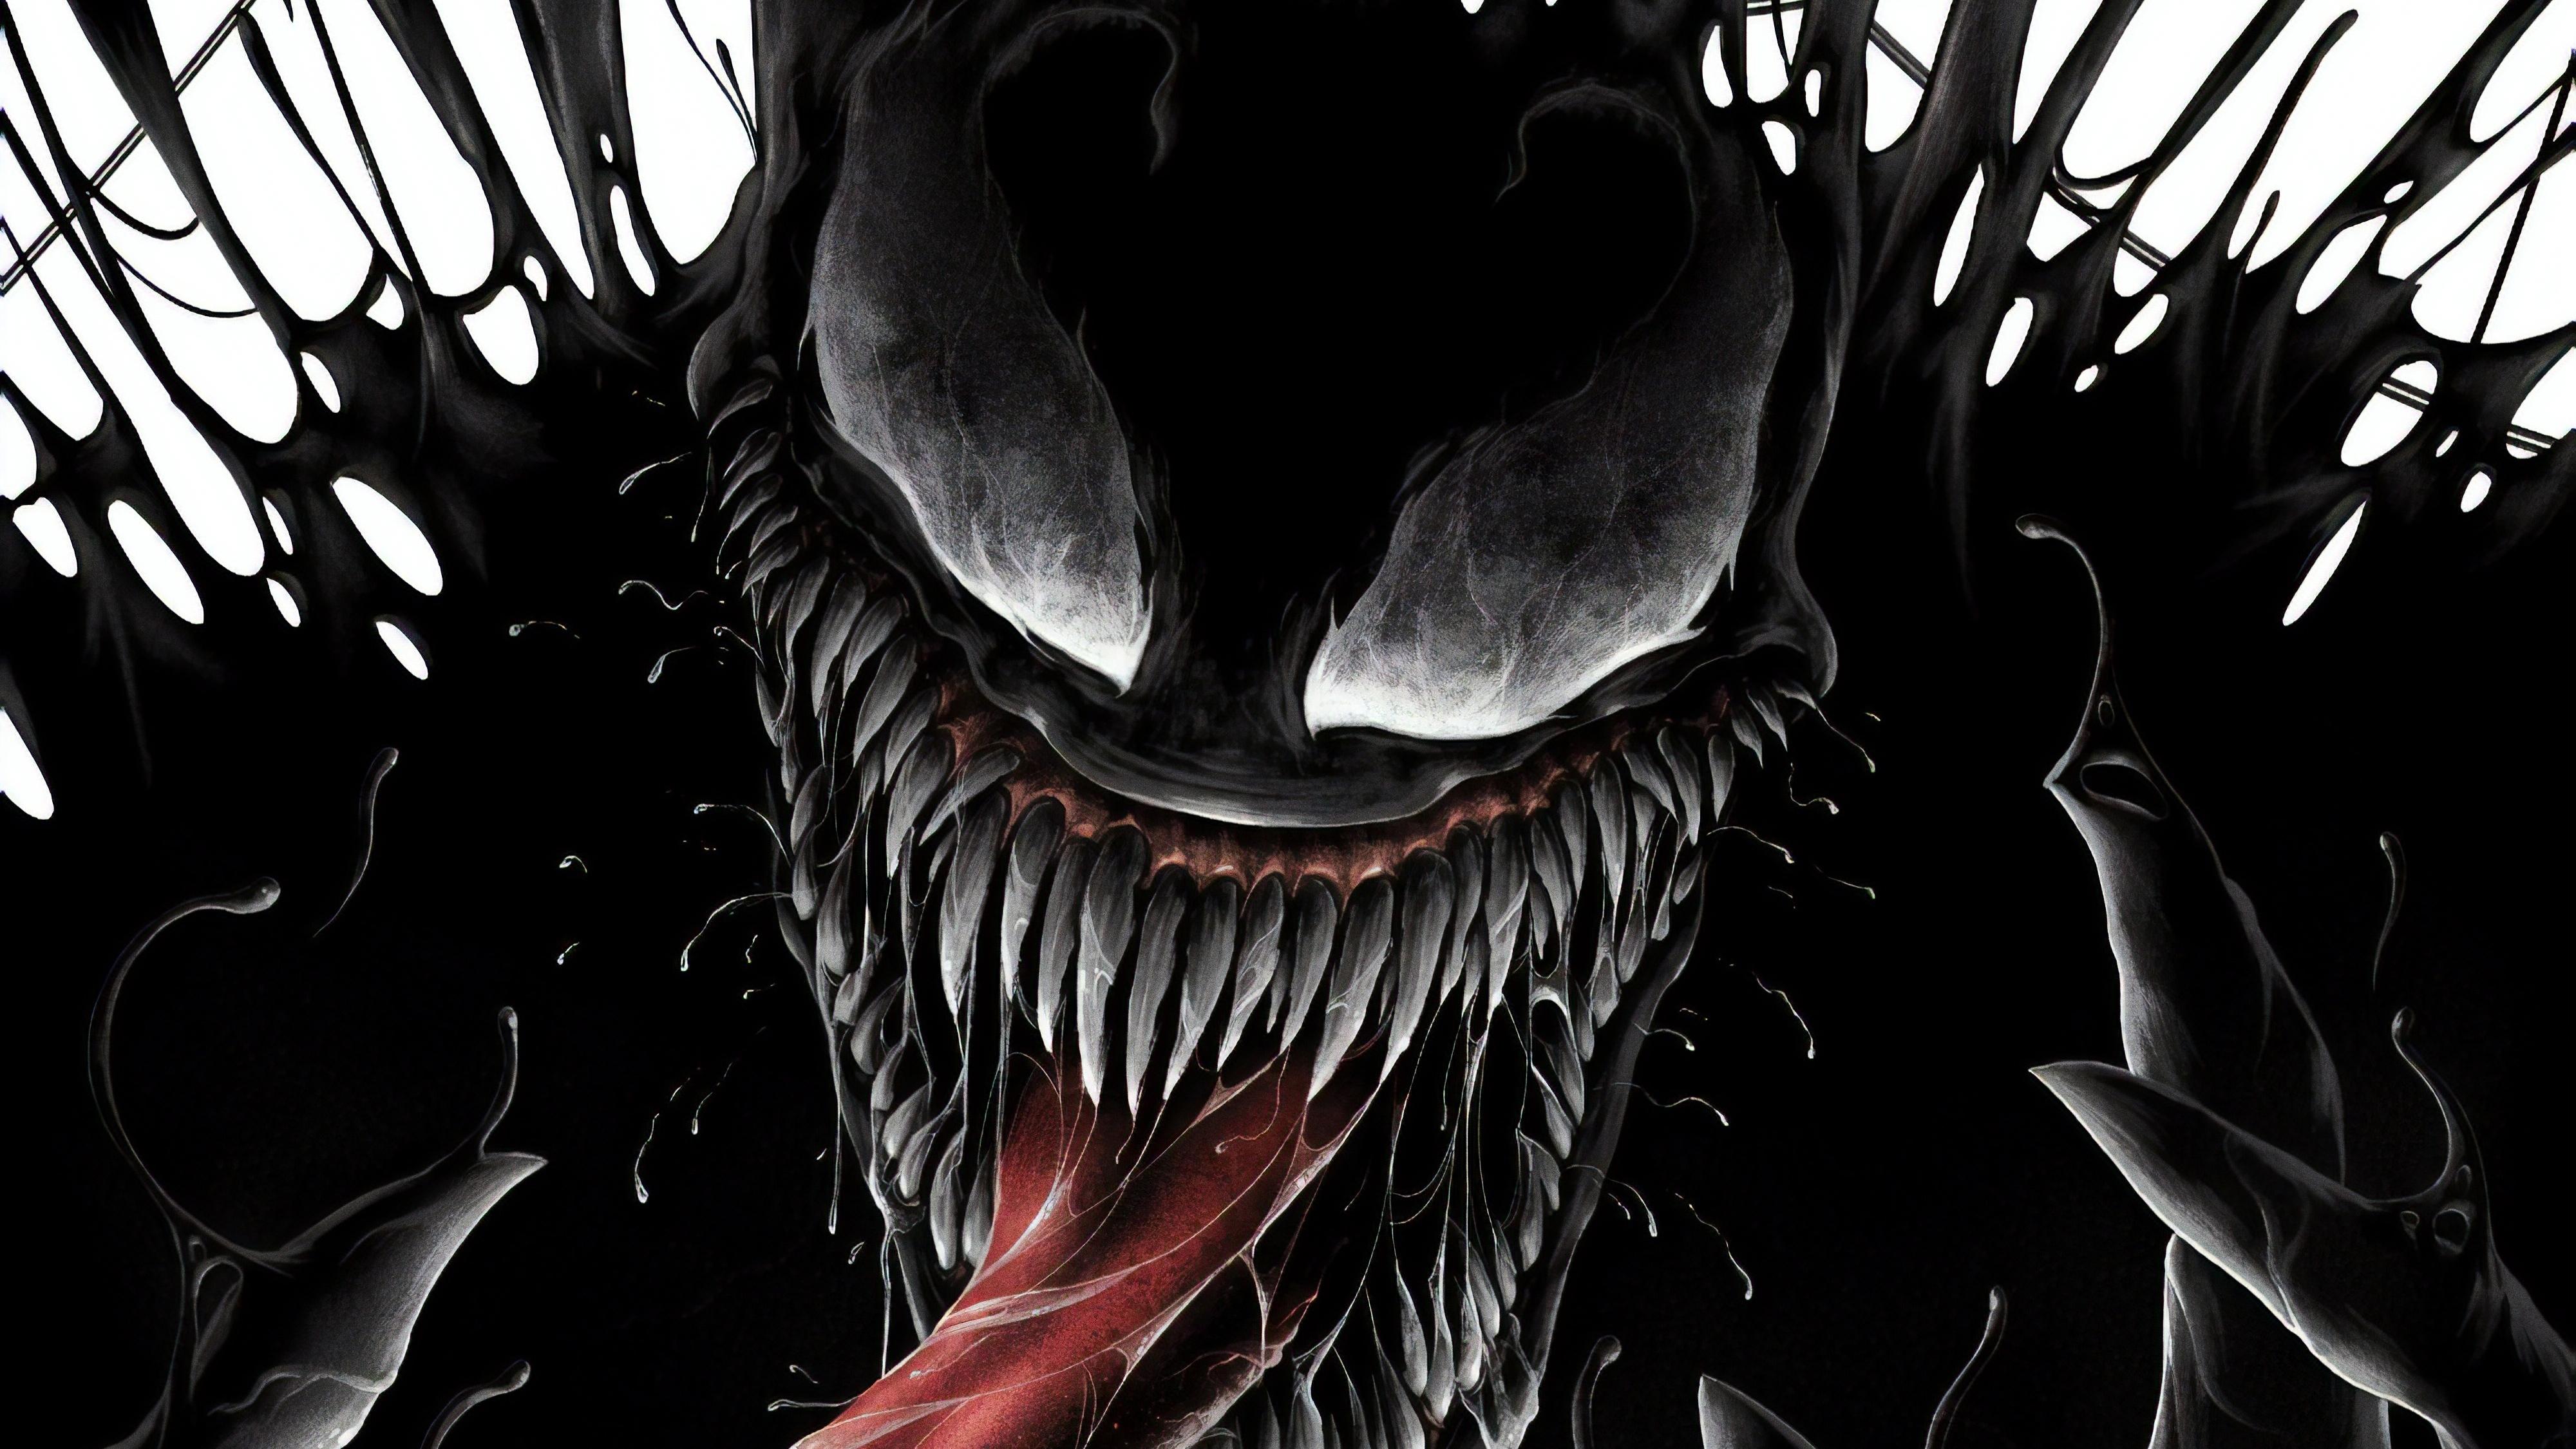 4000 x 2250 · jpeg - Venom 4k New Poster, HD Movies, 4k Wallpapers, Images, Backgrounds ...